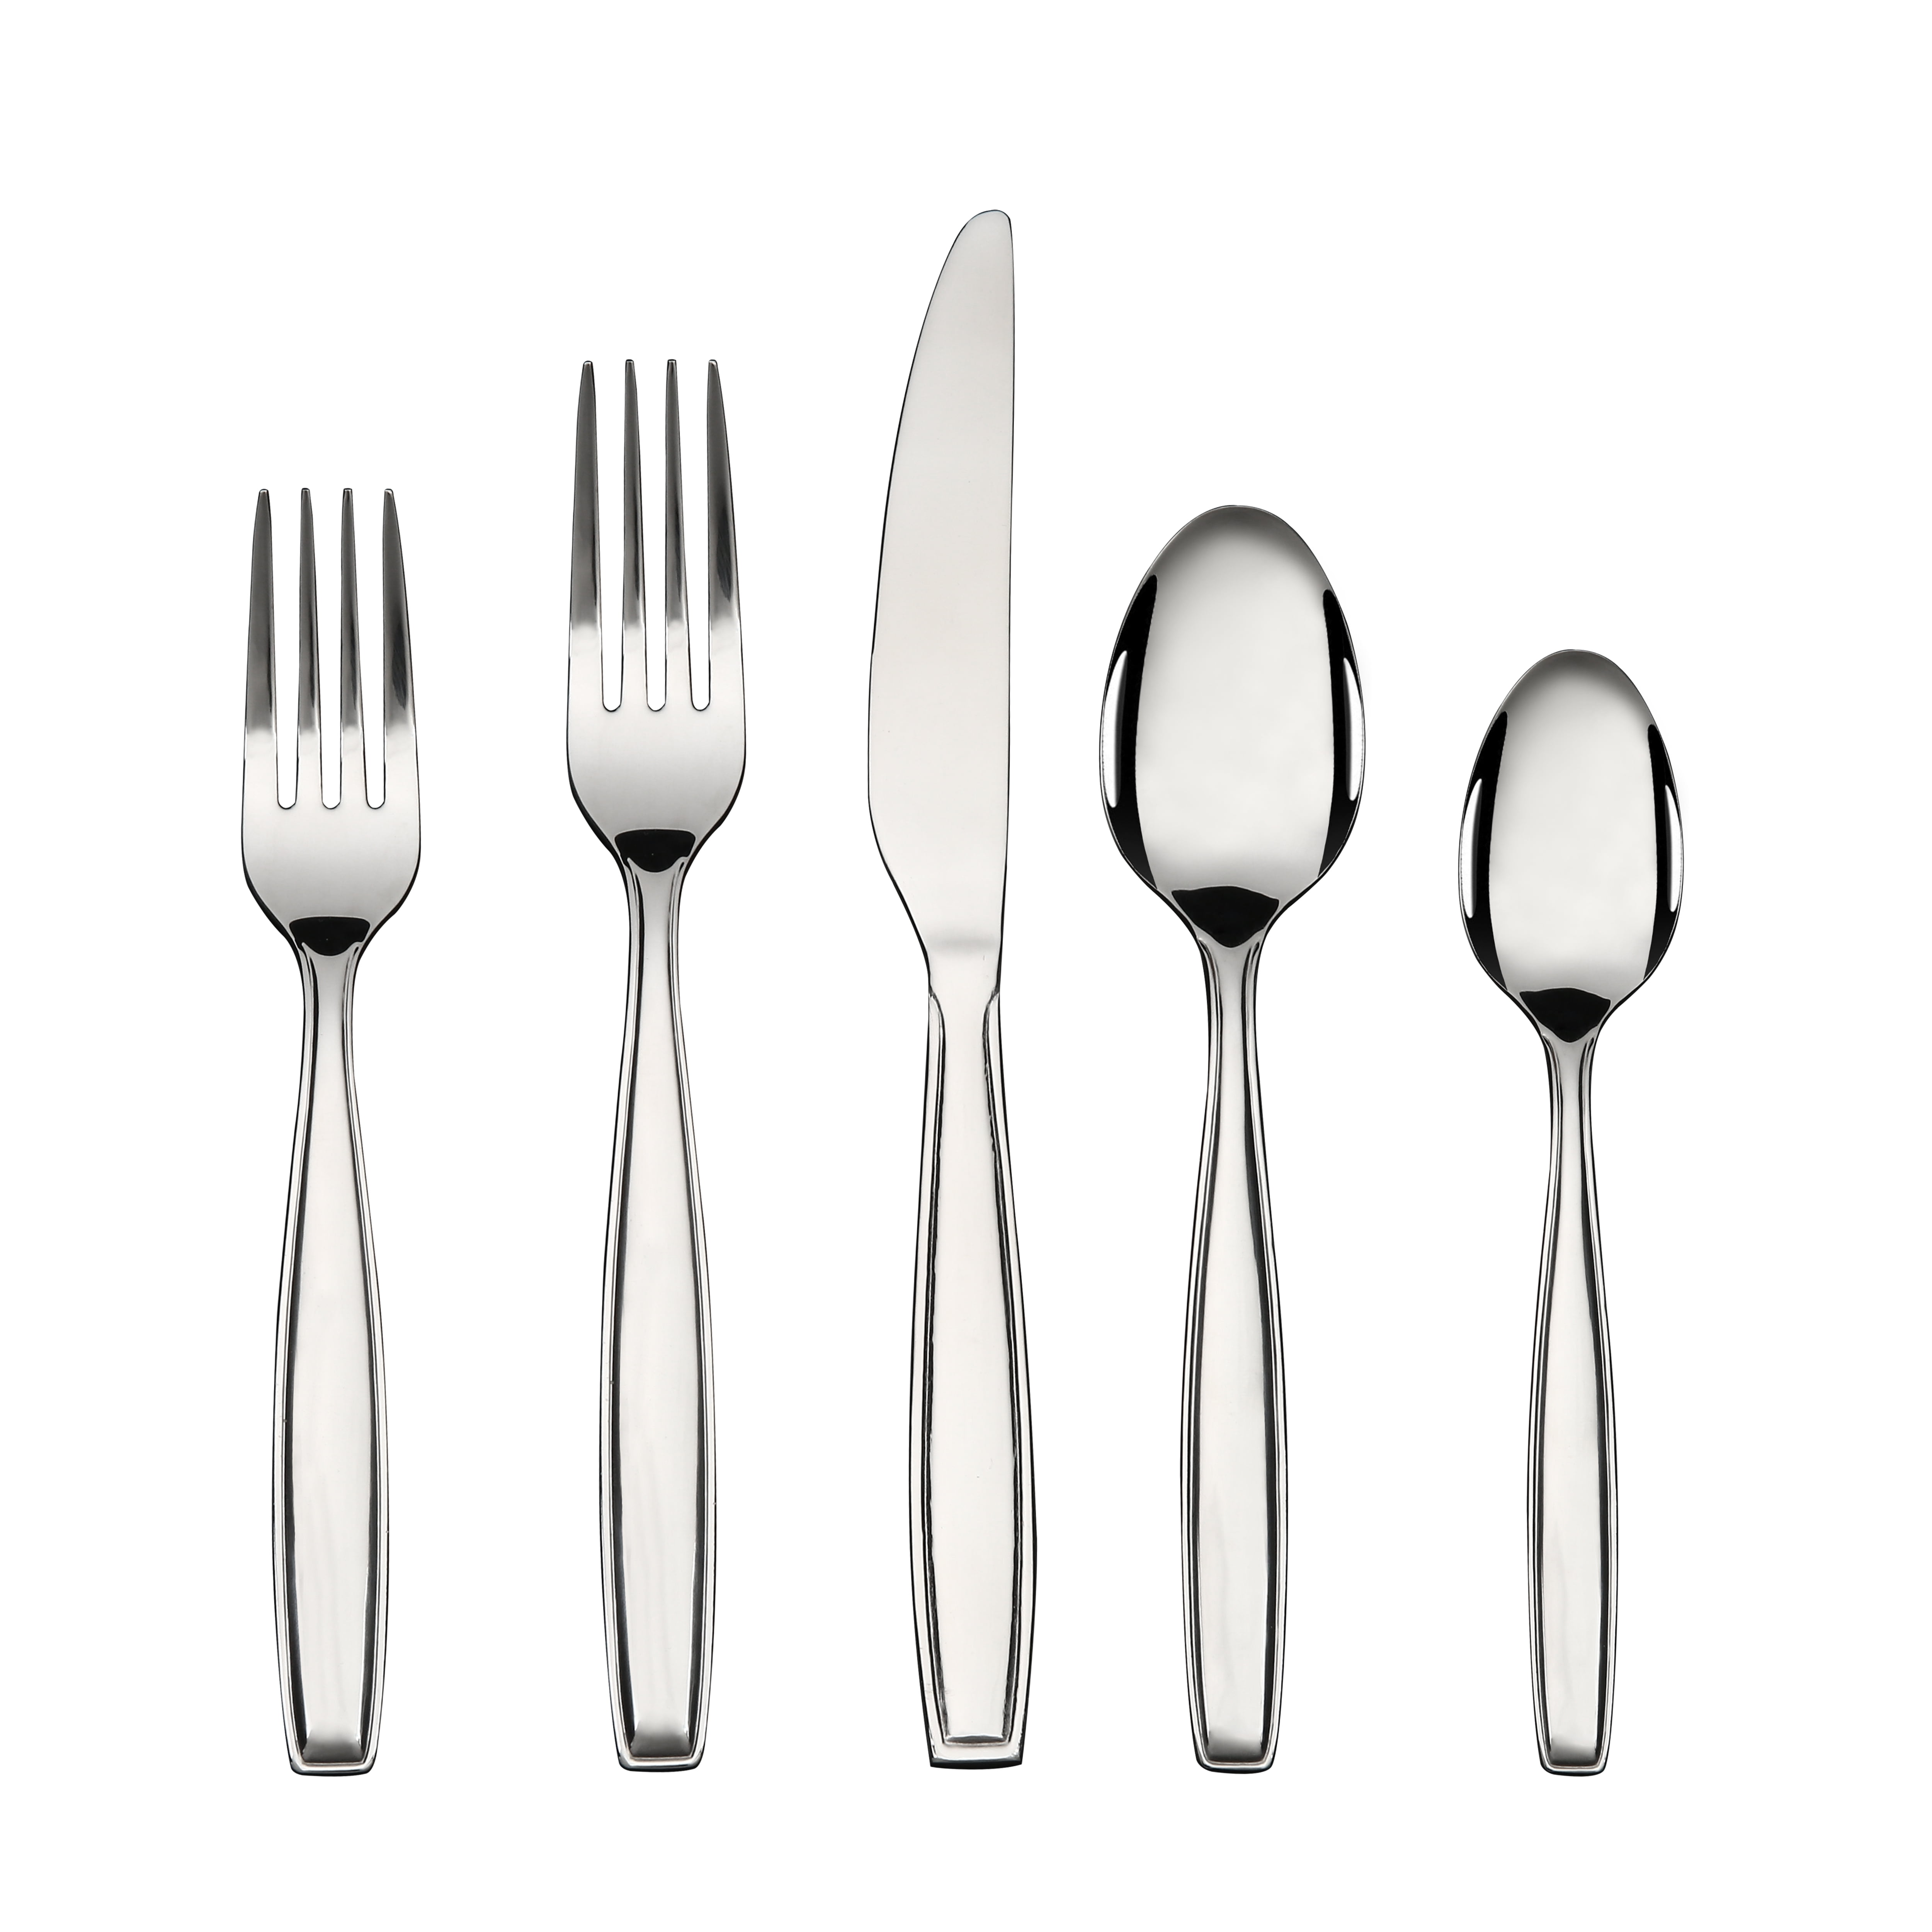 Mainstays Fairport 20 Piece Stainless Steel Flatware Set, Silver Tableware Service for 4